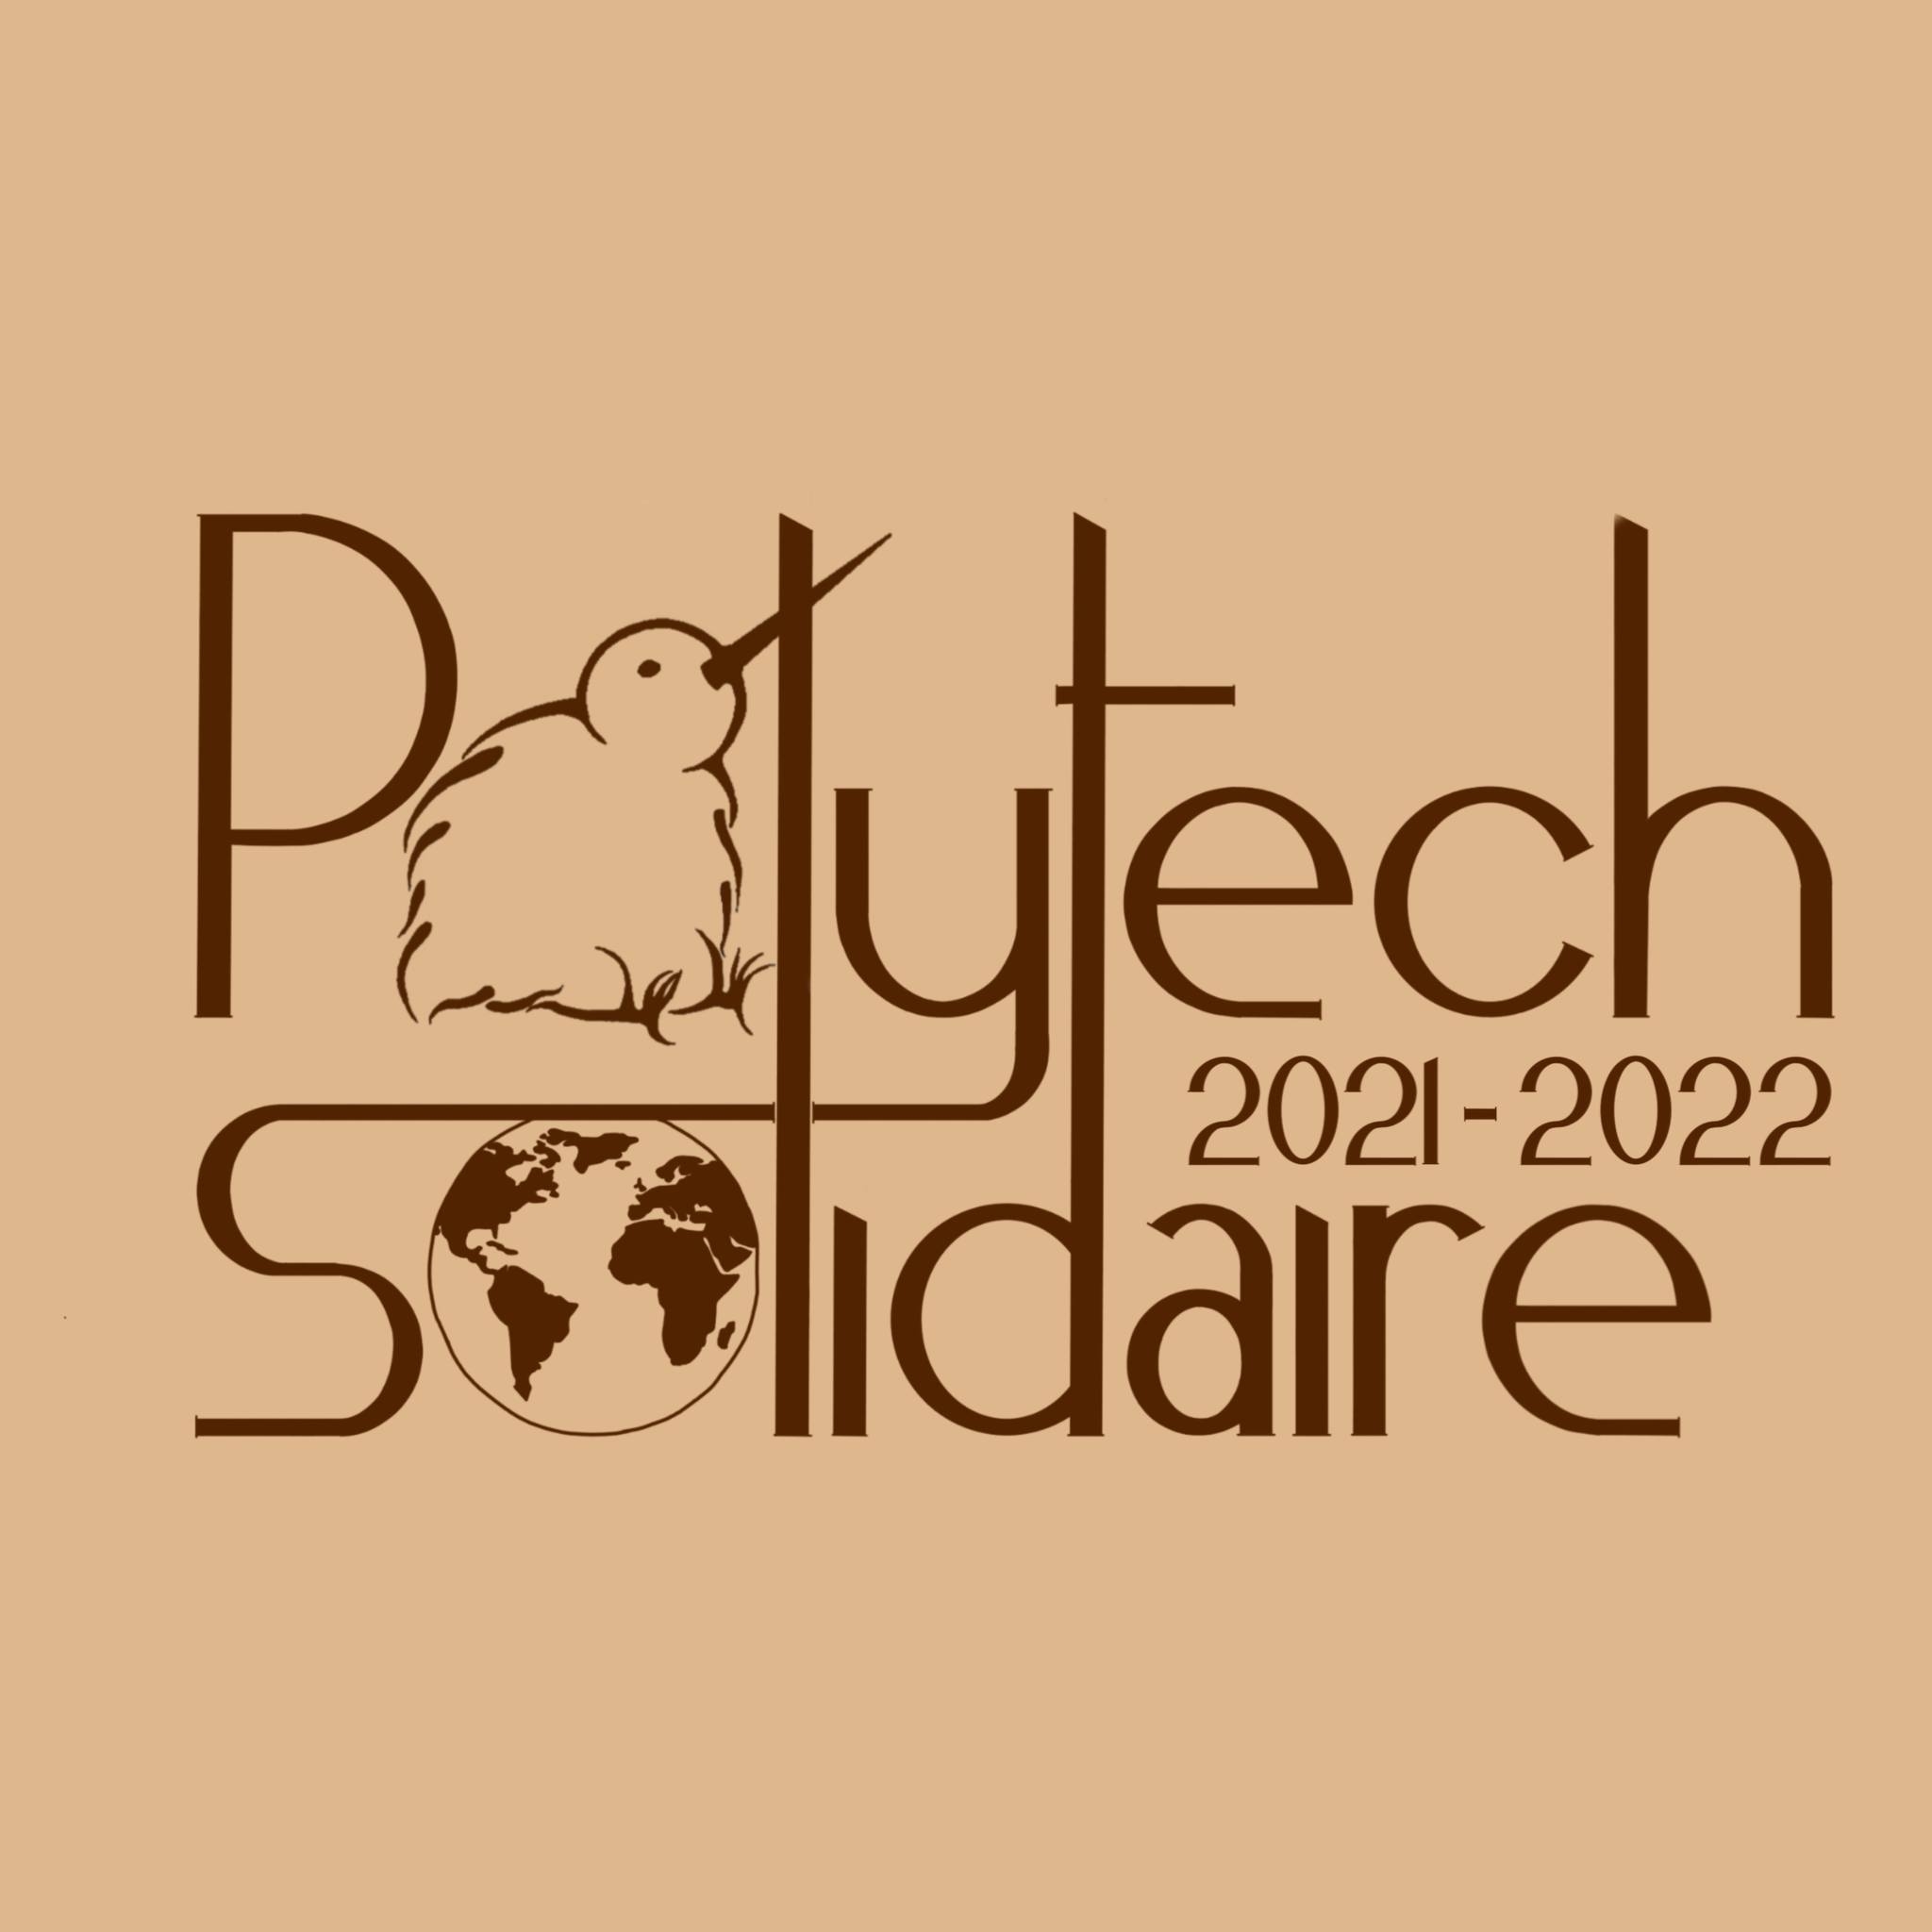 Polytech Solidaire